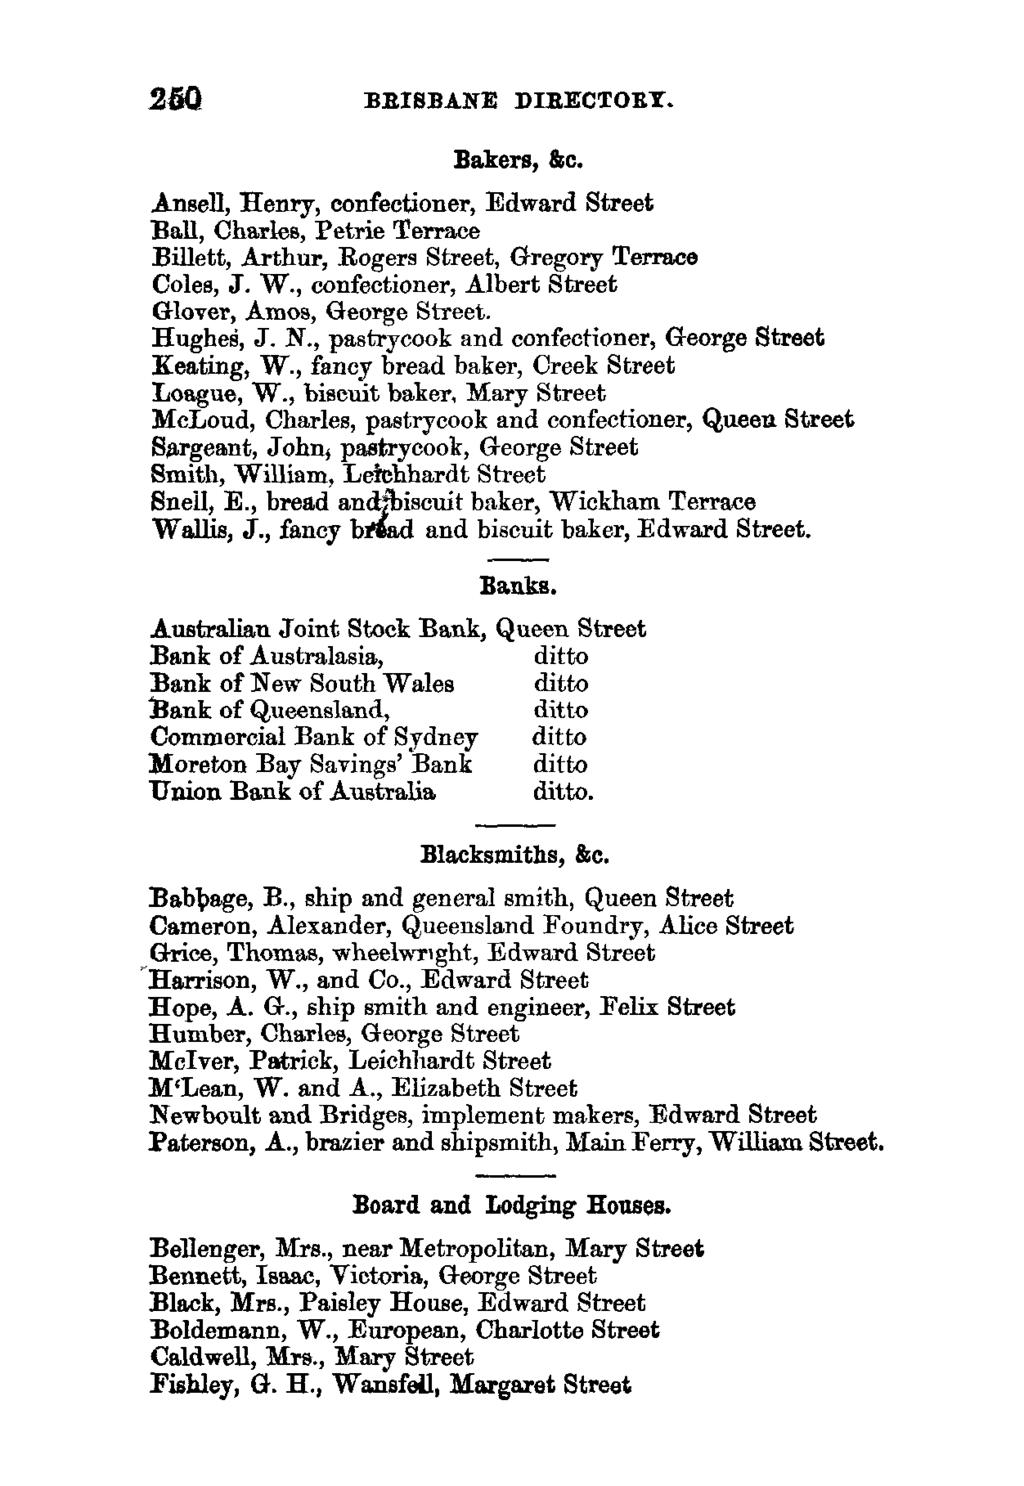 250 BRISBANE DIRECTORY. Bakers, &c. Ansell, Henry, confectioner, Edward Street Ball, Charles, Petrie Terrace Billed, Arthur, Rogers Street, Gregory Terrace Coles, J. W.